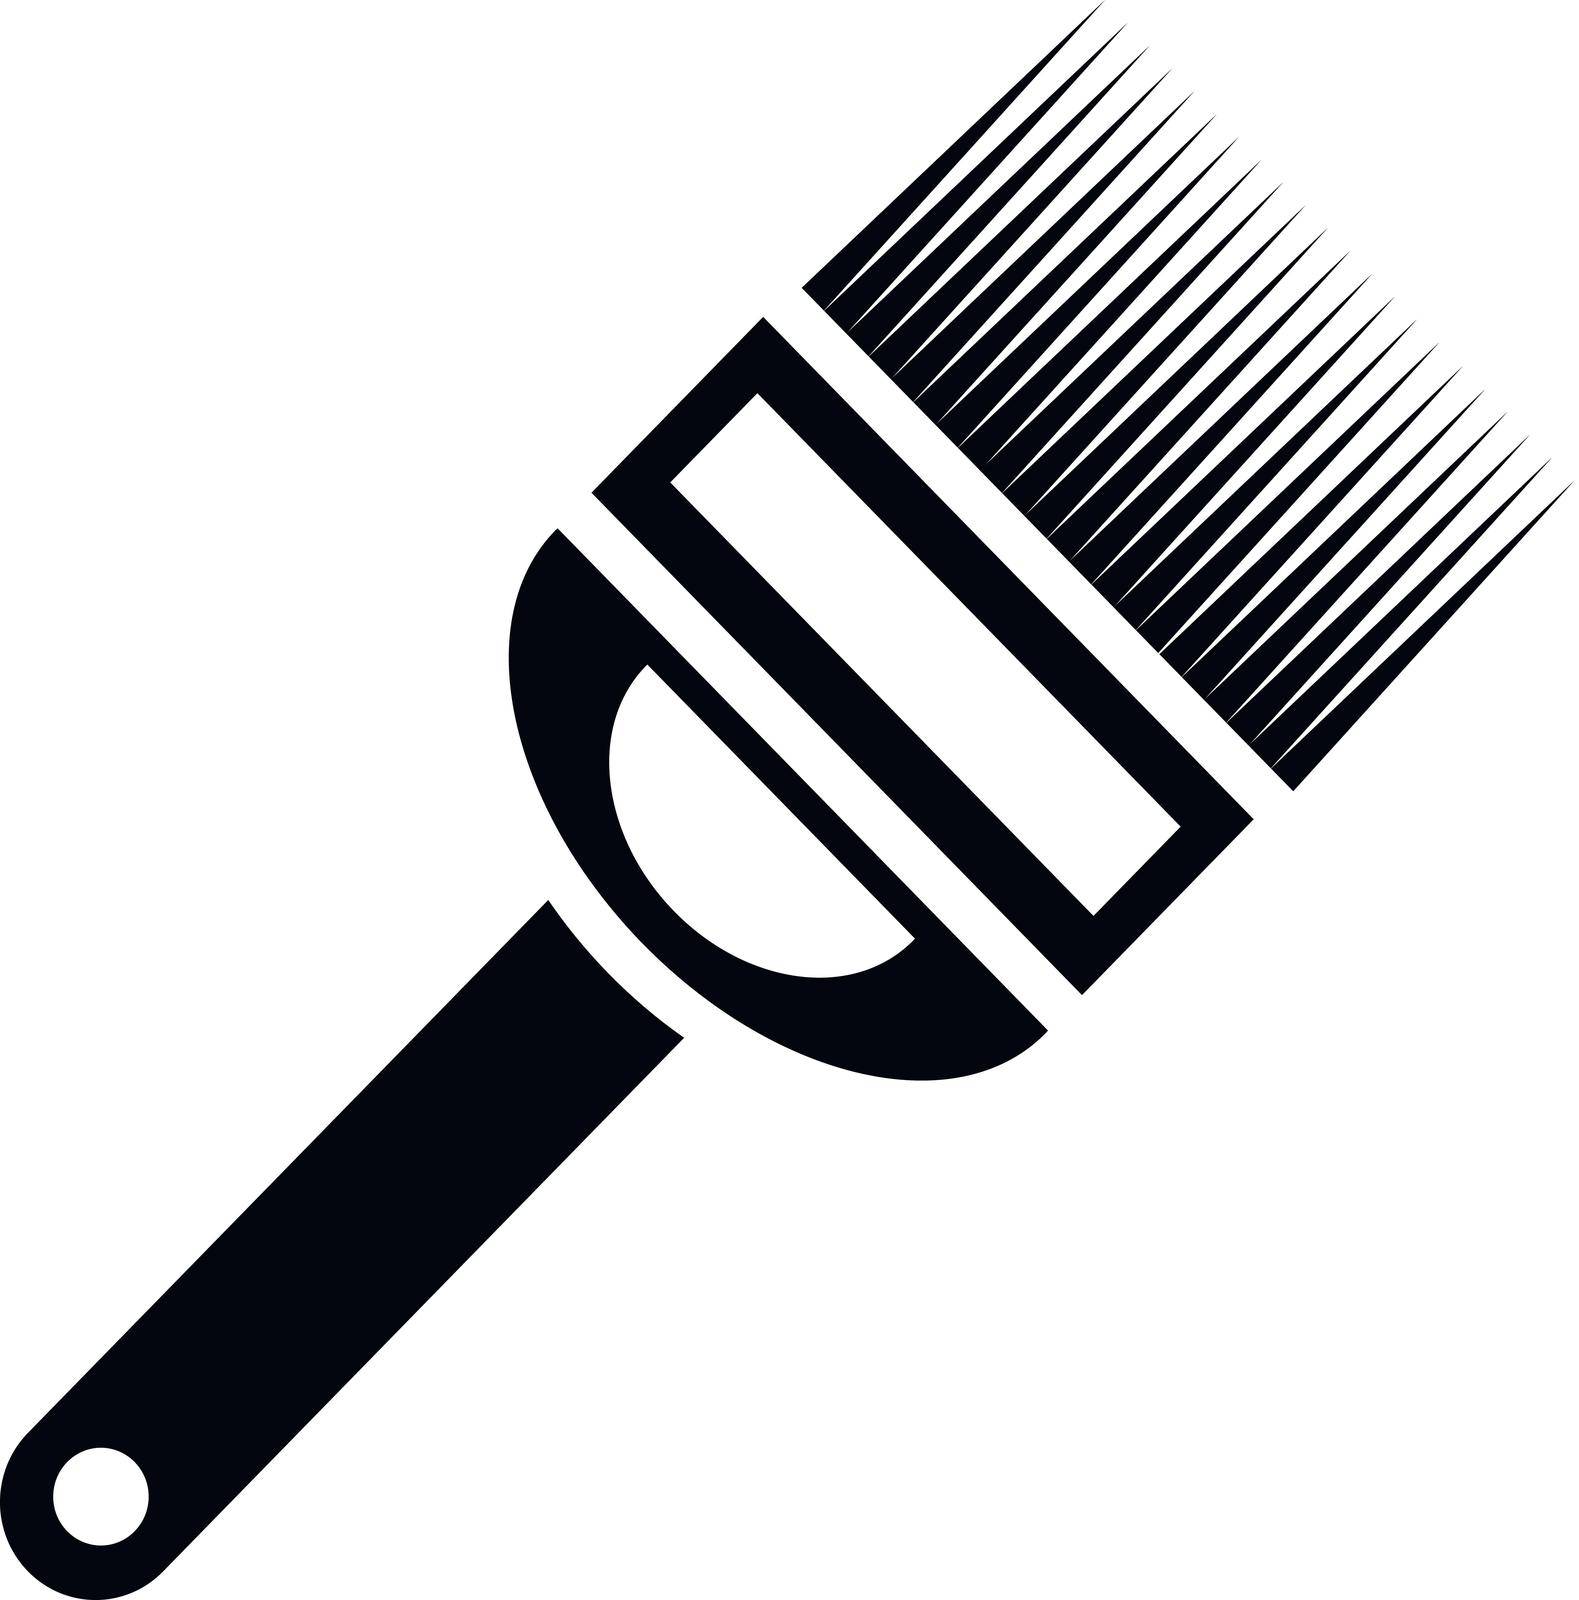 Uncapping fork icon, simple style by ylivdesign